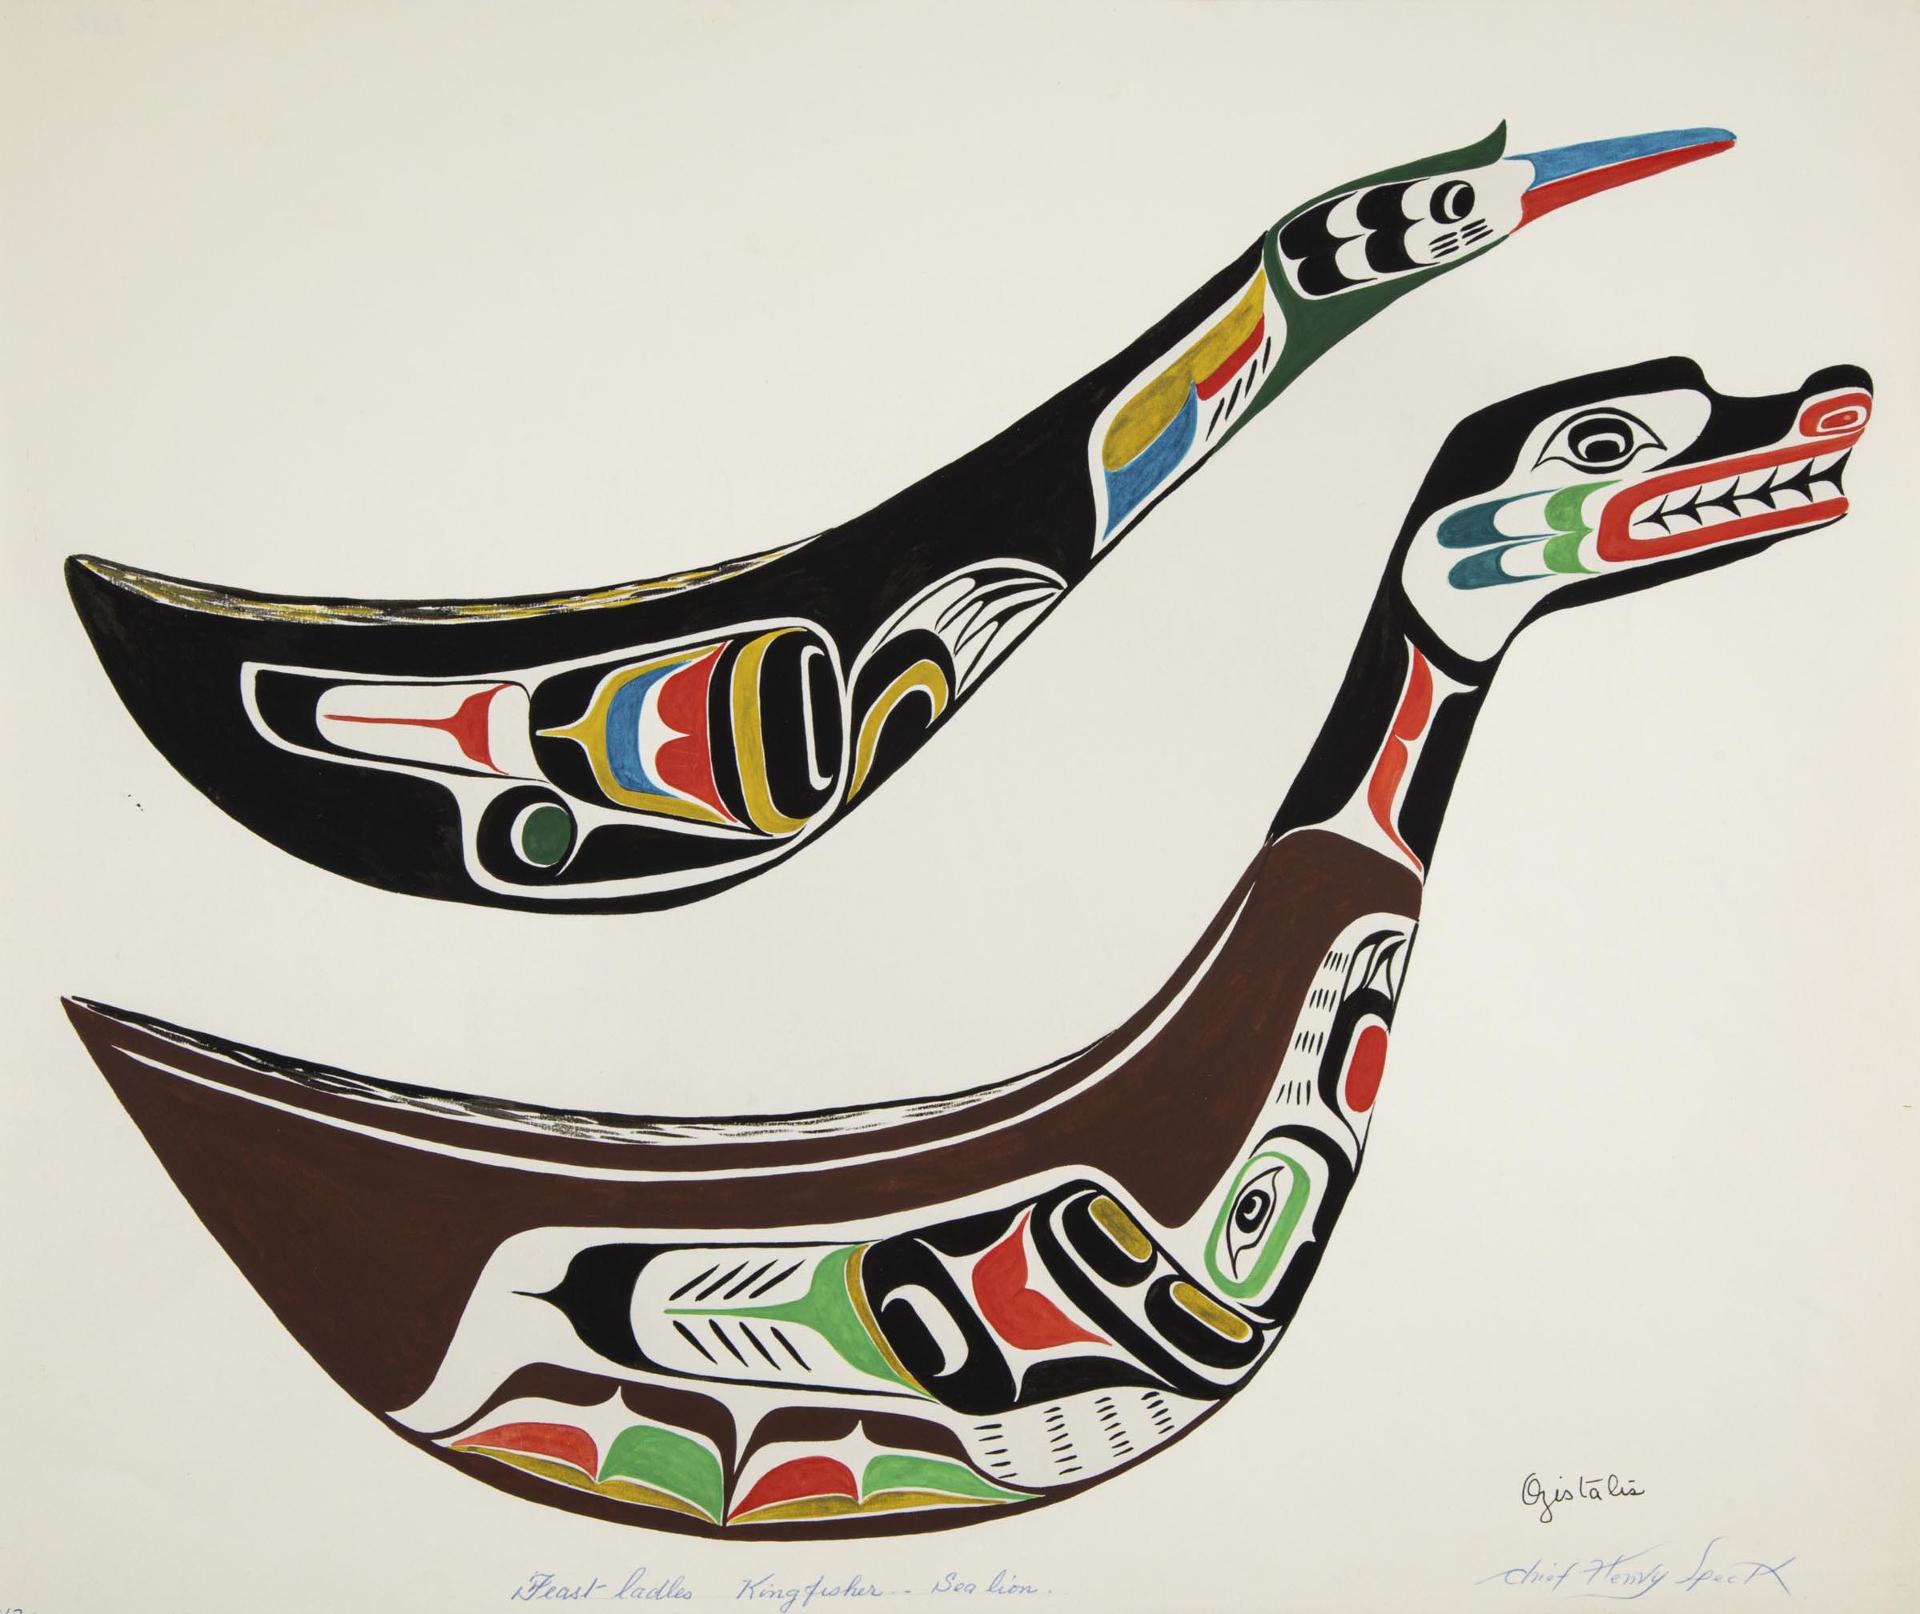 Chief Henry Speck (1908-1971) - Kingfisher, Sea Lion, 1959